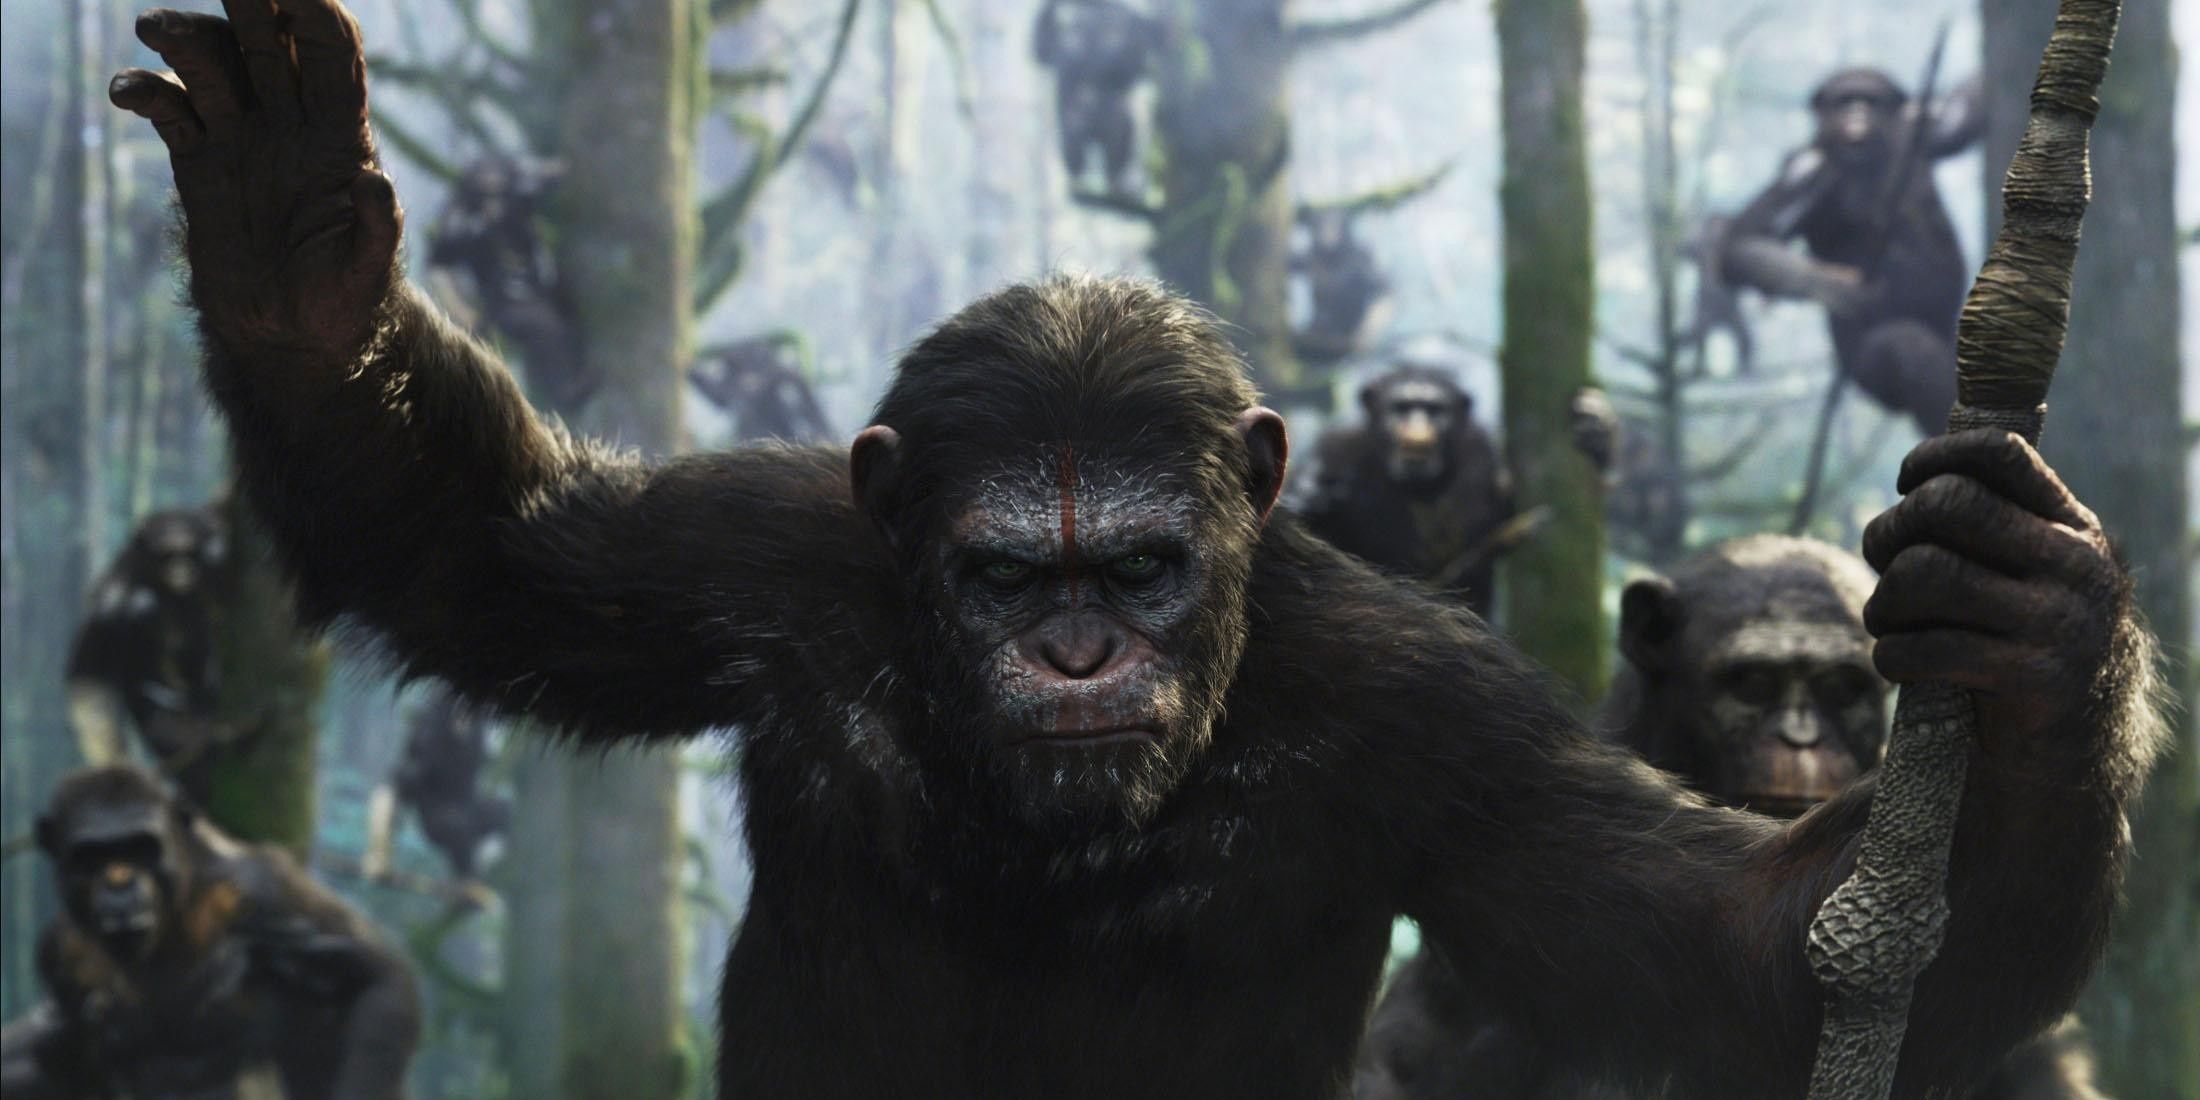 Making Kingdom of the of the Apes a Sequel Is the Right Move